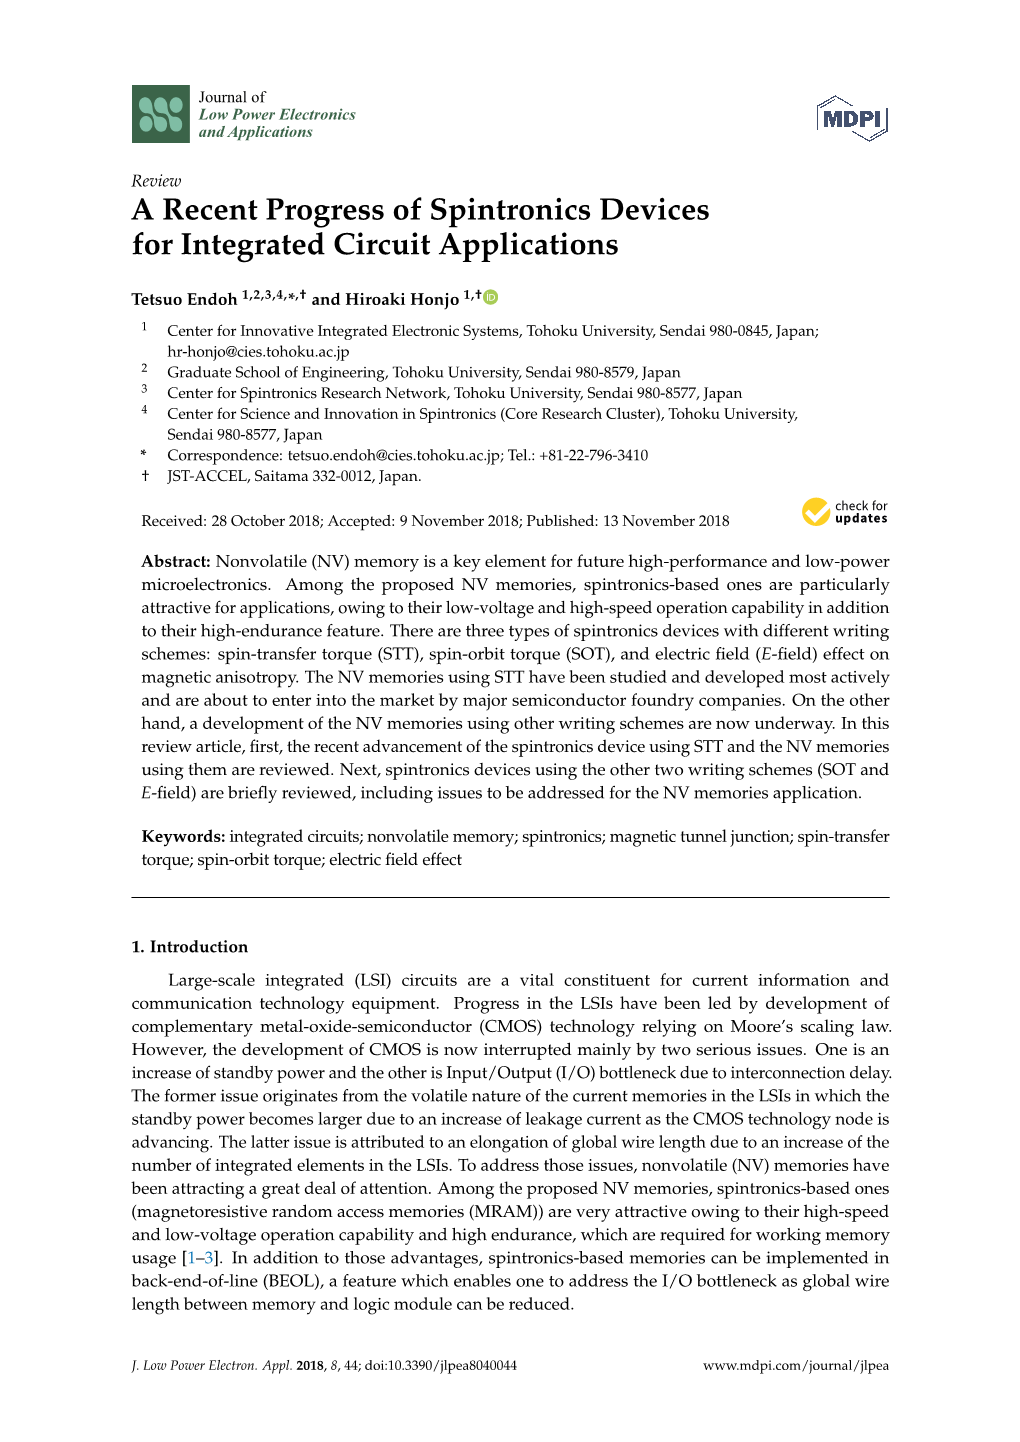 A Recent Progress of Spintronics Devices for Integrated Circuit Applications